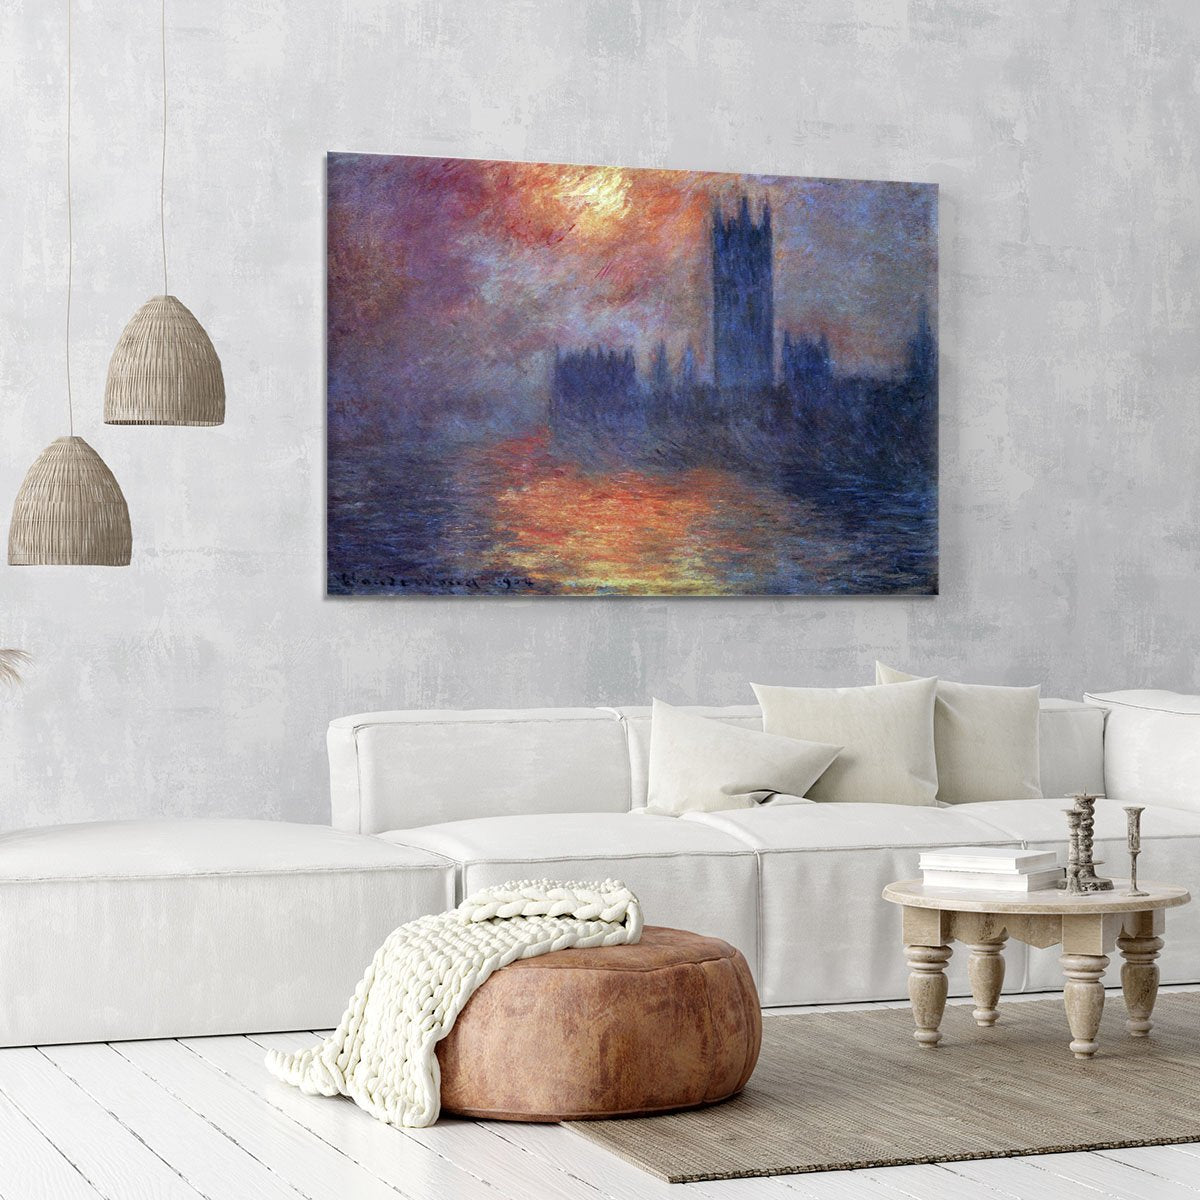 The Houses of Parliament Sunset by Monet Canvas Print or Poster